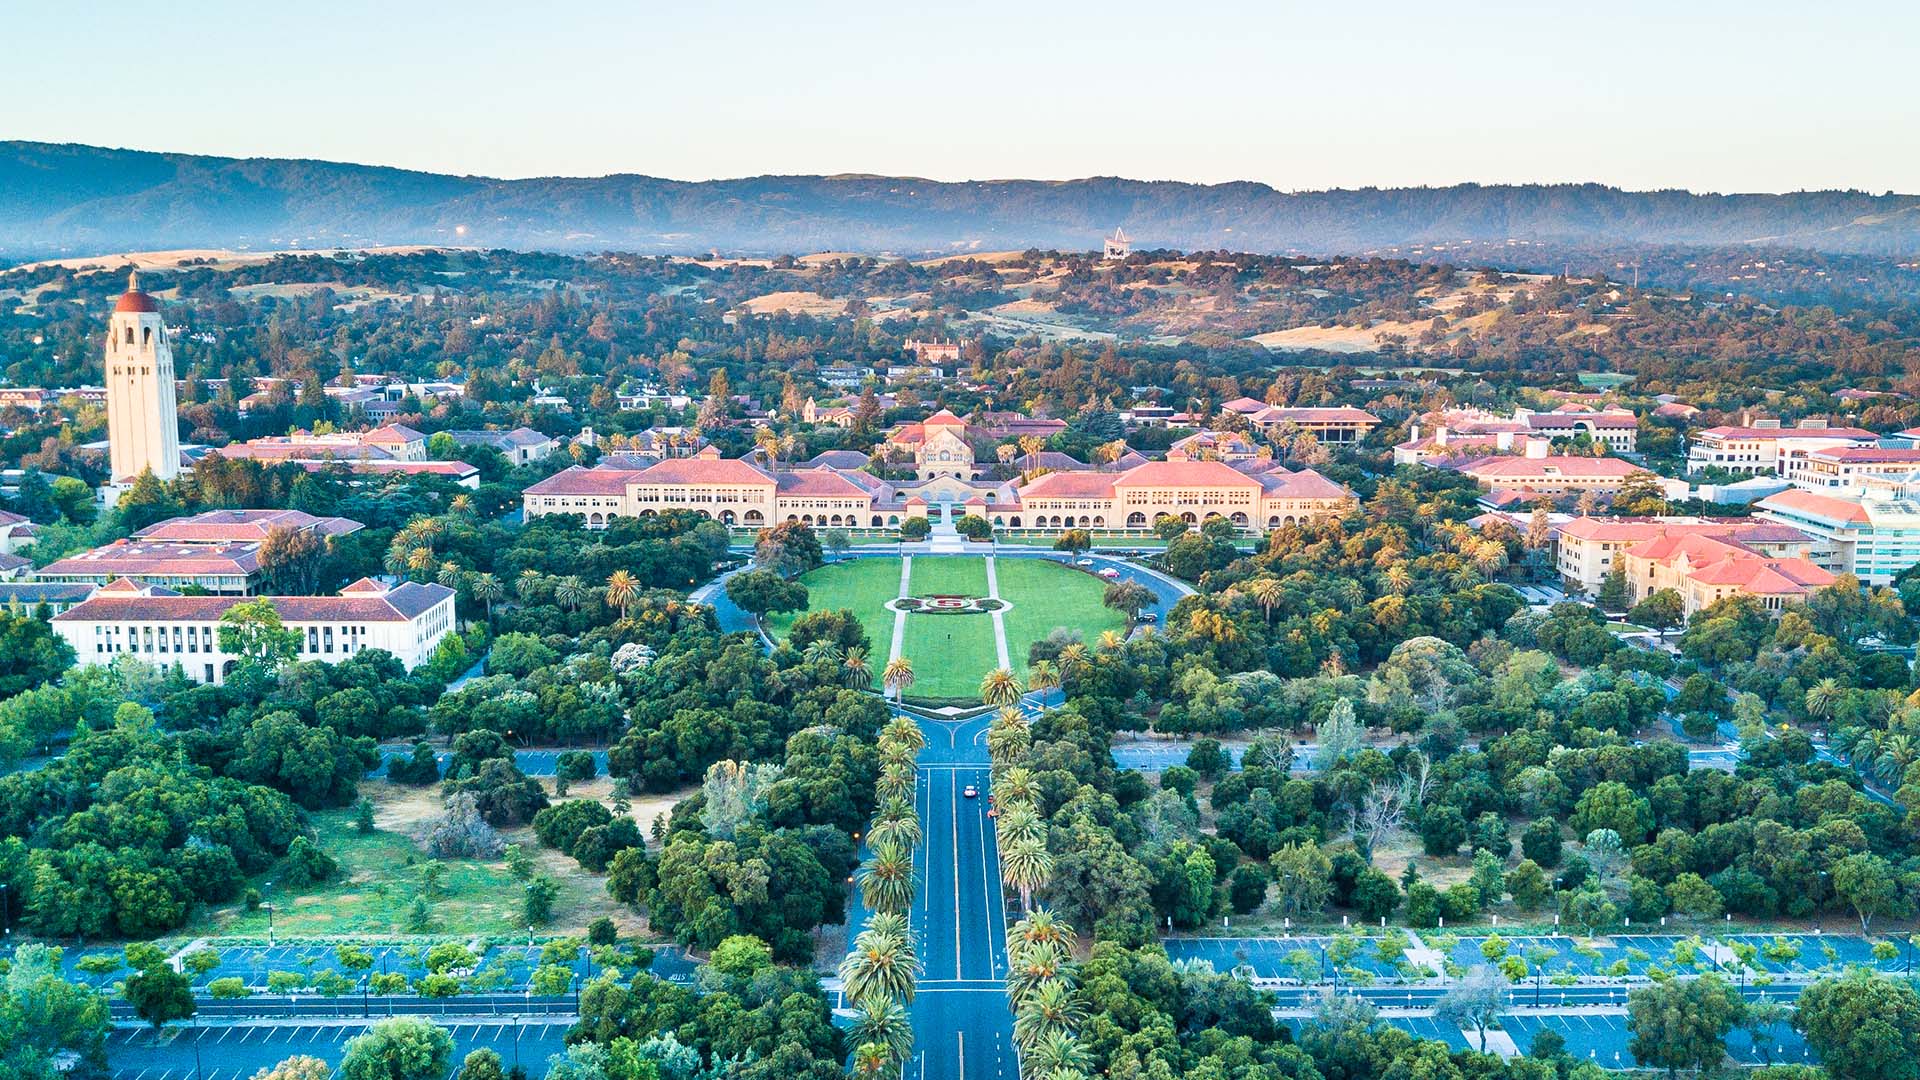 aerial view of stanford university campus